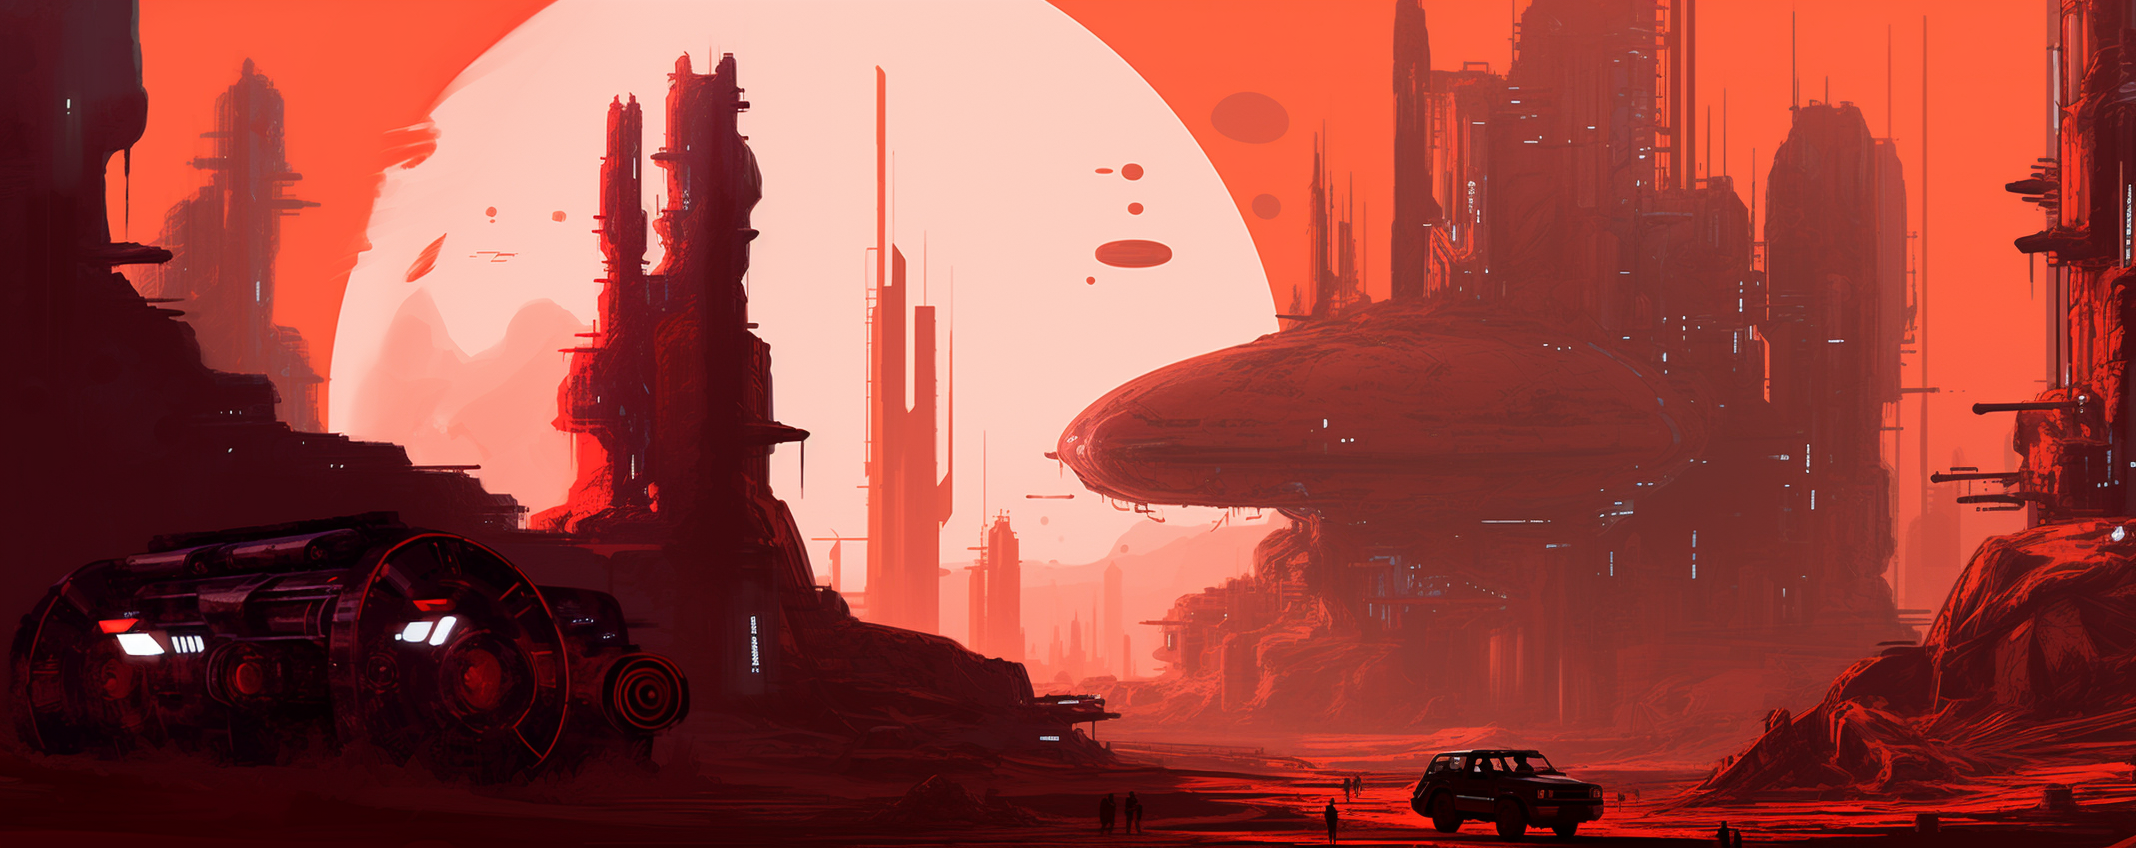 the__ed_a_futuristic_drawing_of_a_red_planet_with_huge_cyberpun_82918352-8642-46b5-8222-17e22d6591e7.png